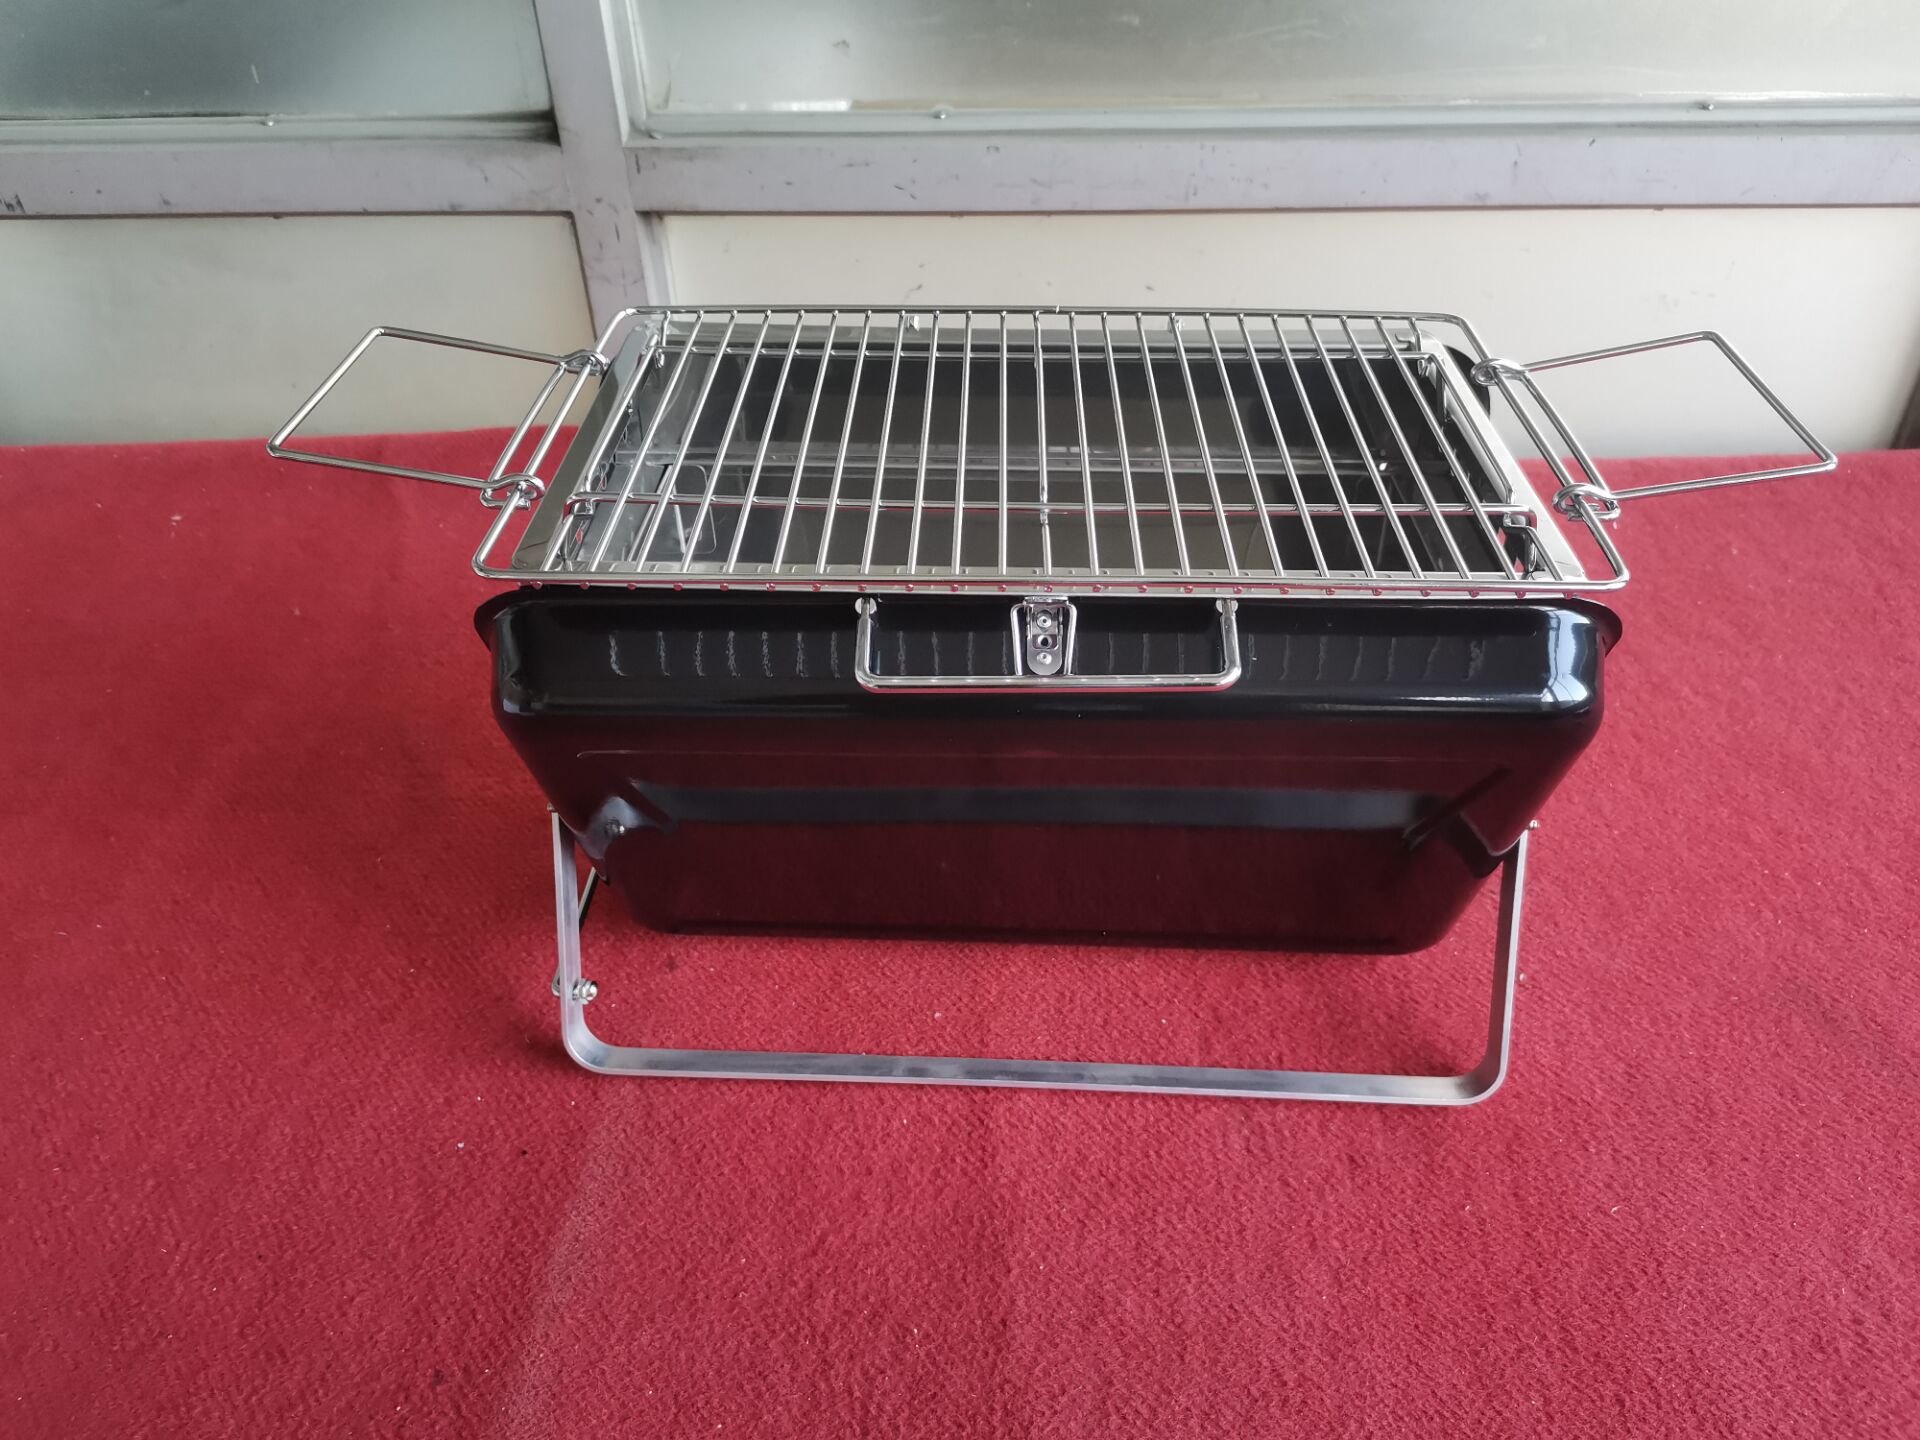 Inspection photo of customized Charcoal Barbecue Grill